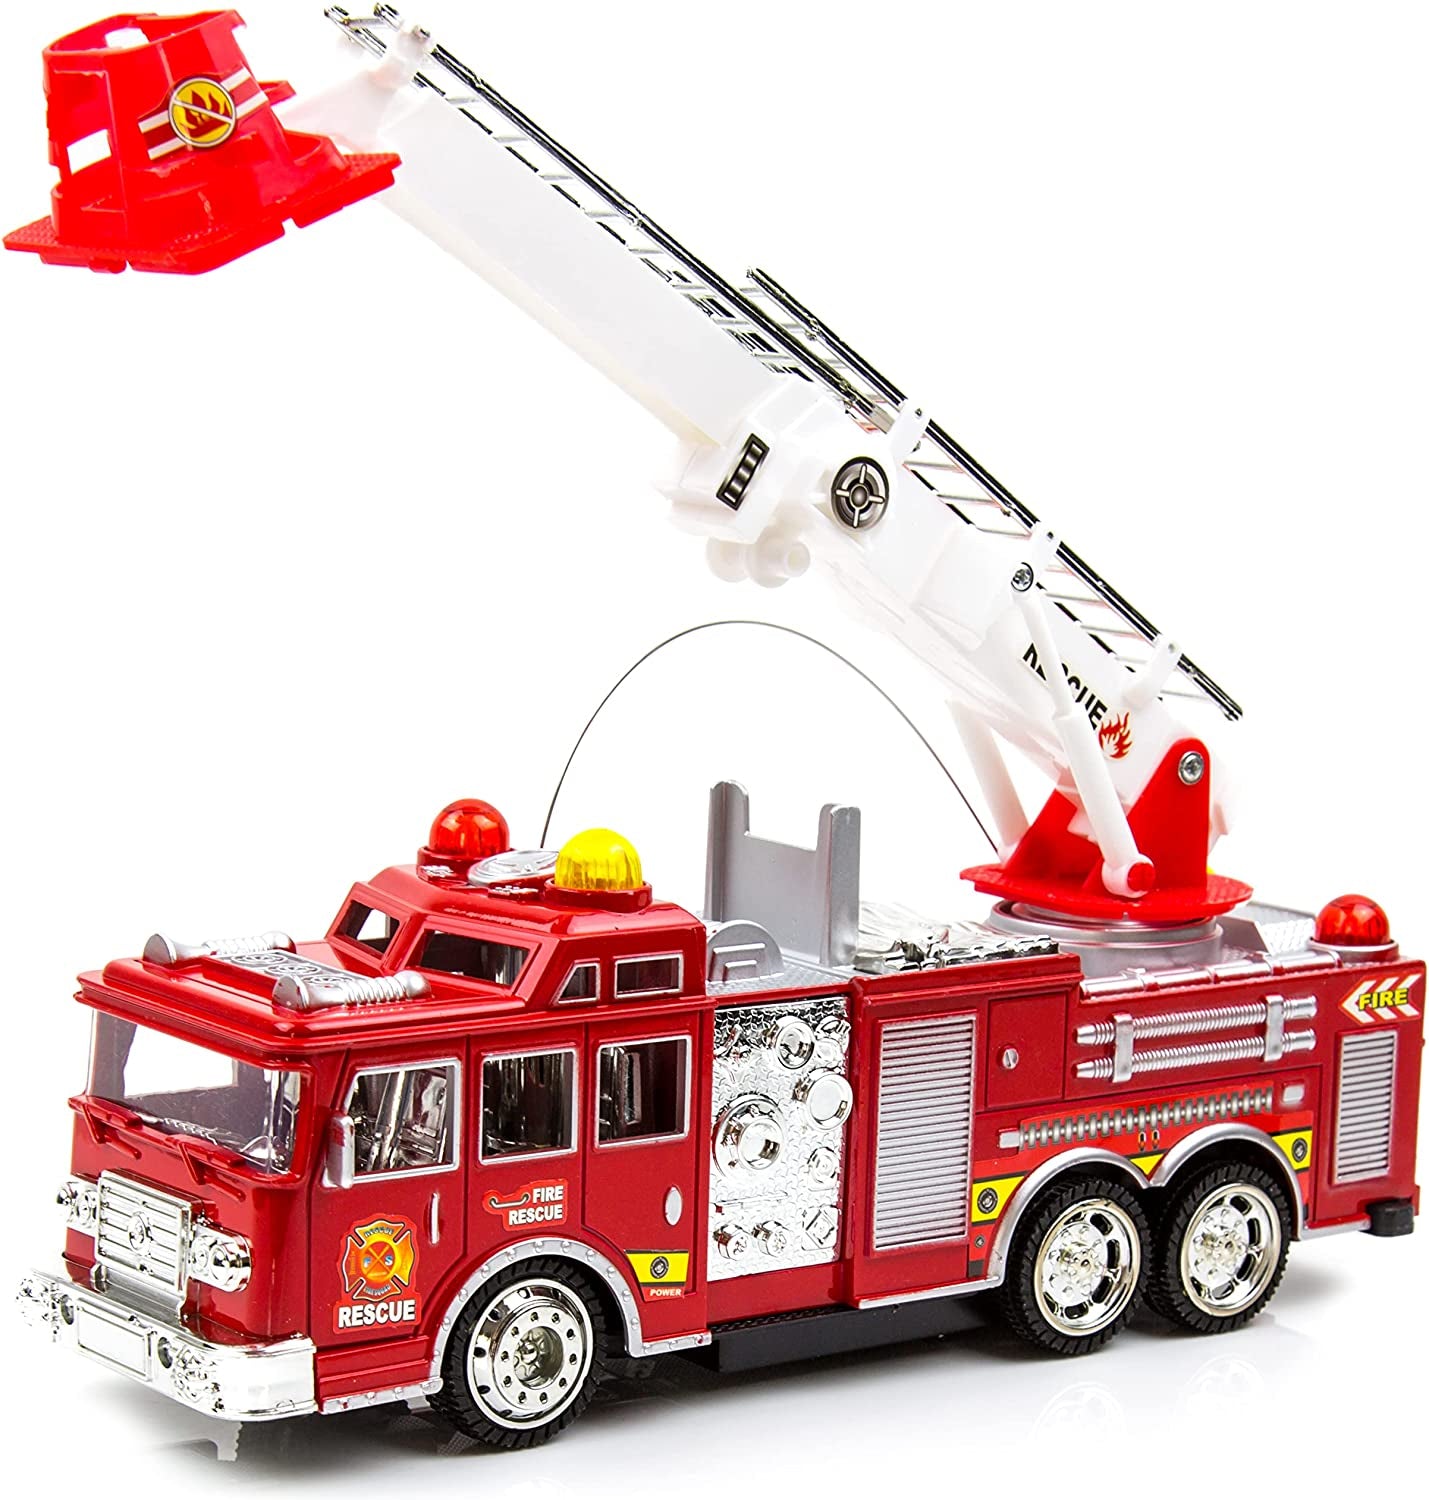 Toysery Fire Truck Toy with 3D Flashing Lights, Siren and Fire Fighter Sounds Effects. Extendable Rotating Rescue Ladder for Boys & Girls Ages 3-7+